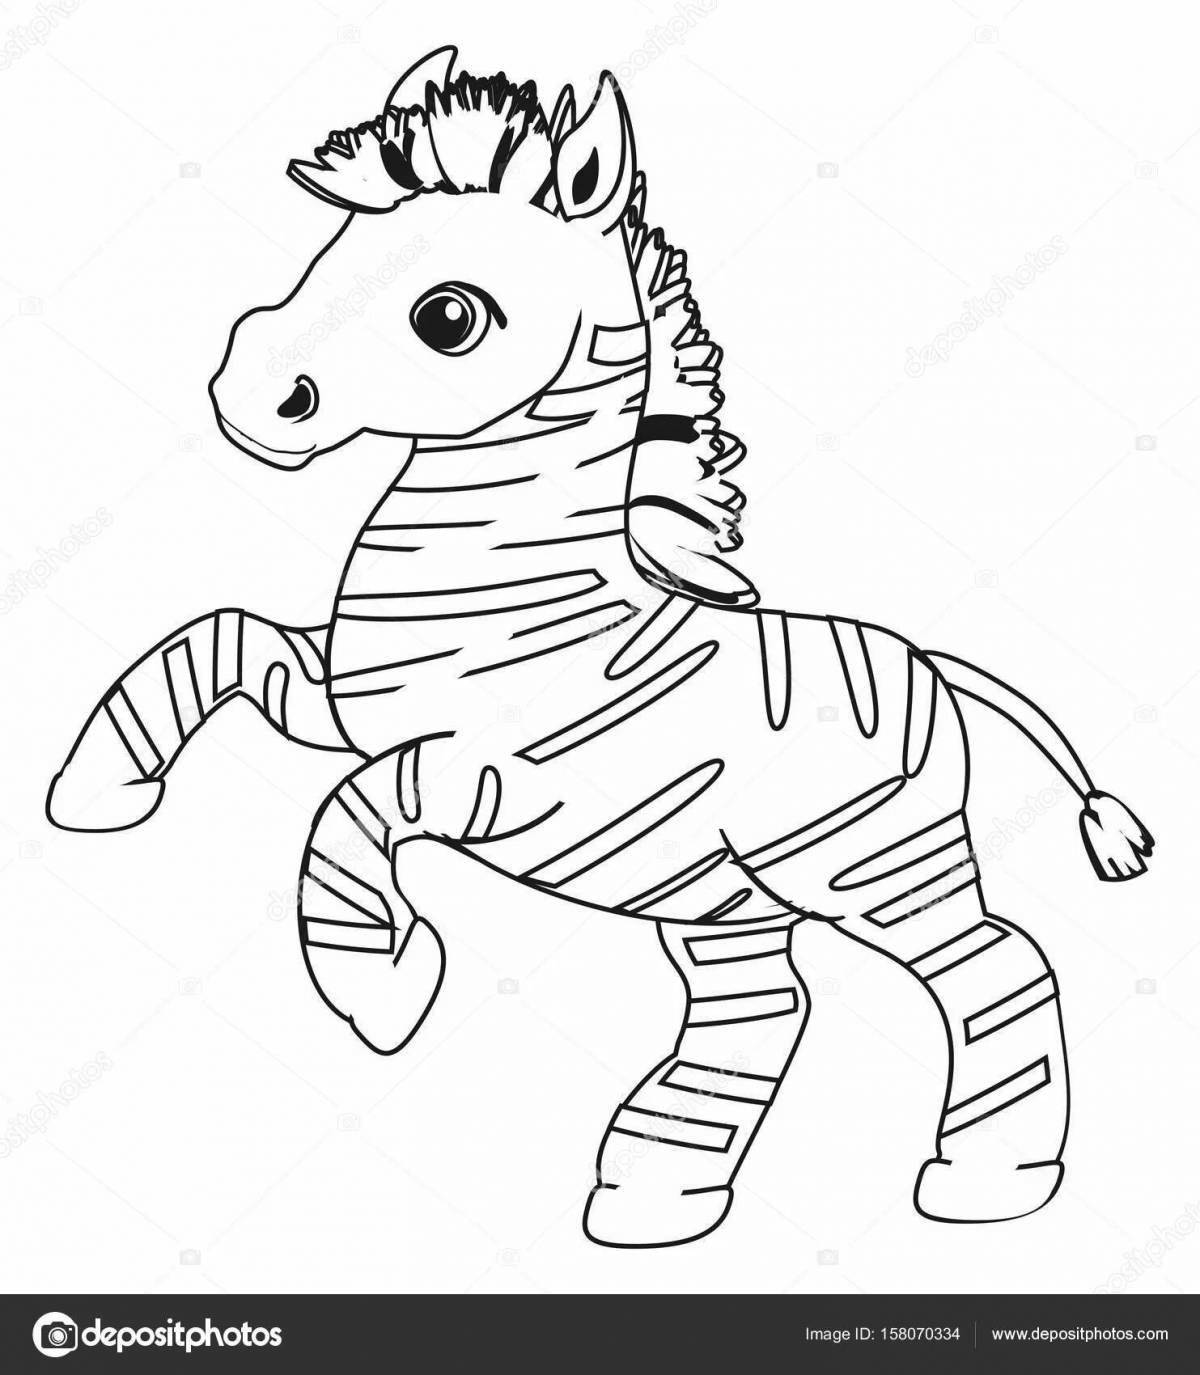 Vibrant Zebra Coloring Page for Toddlers